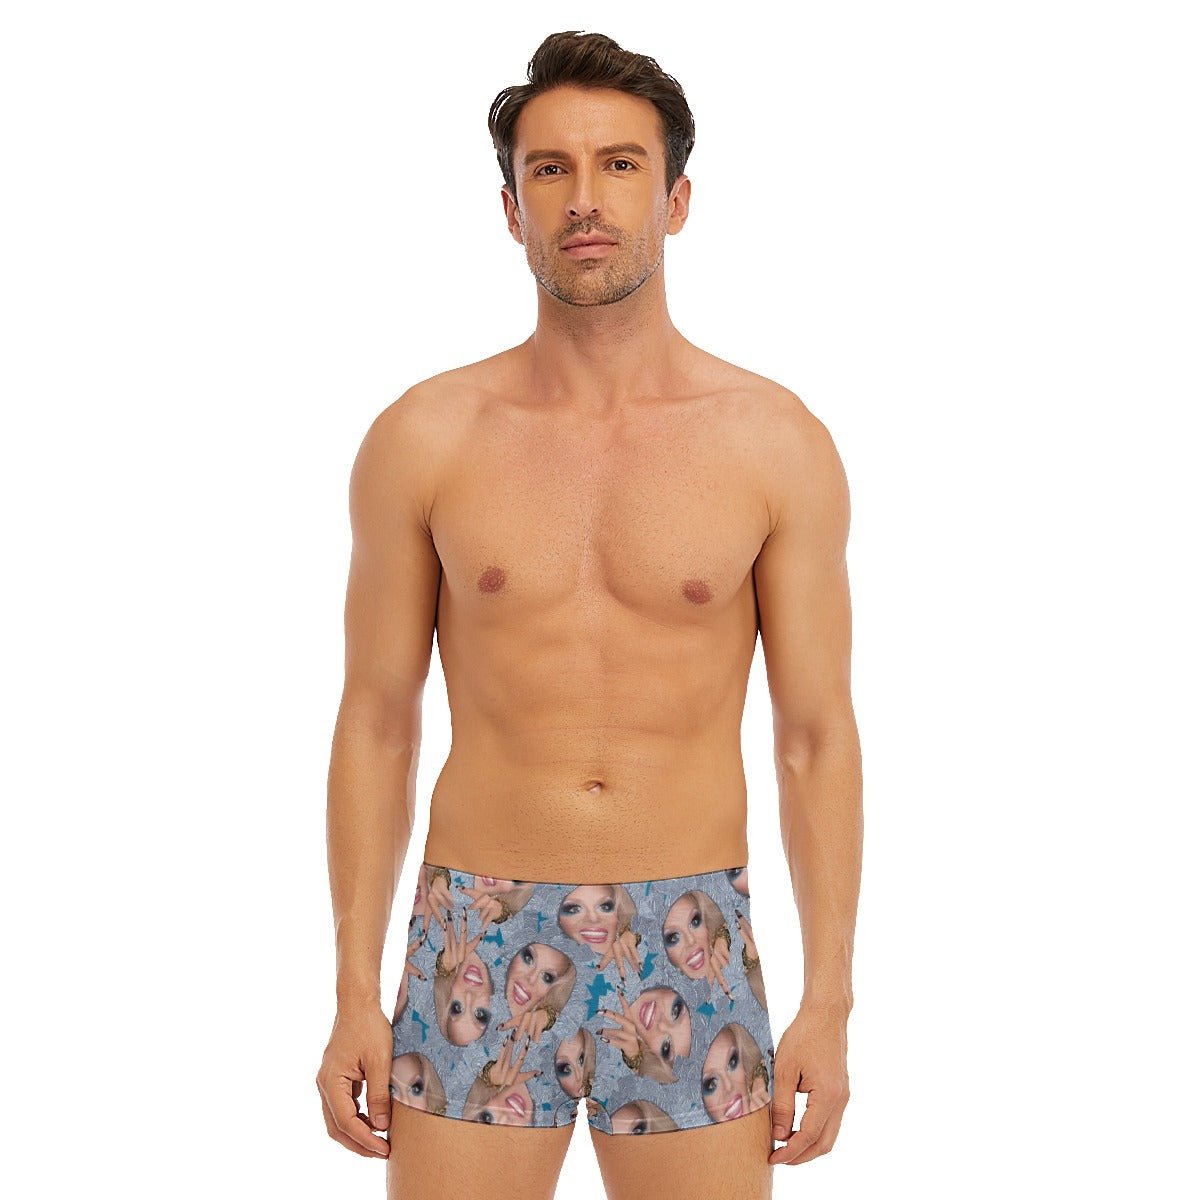 Willam - Glory Hole Short Boxer Briefs – dragqueenmerch